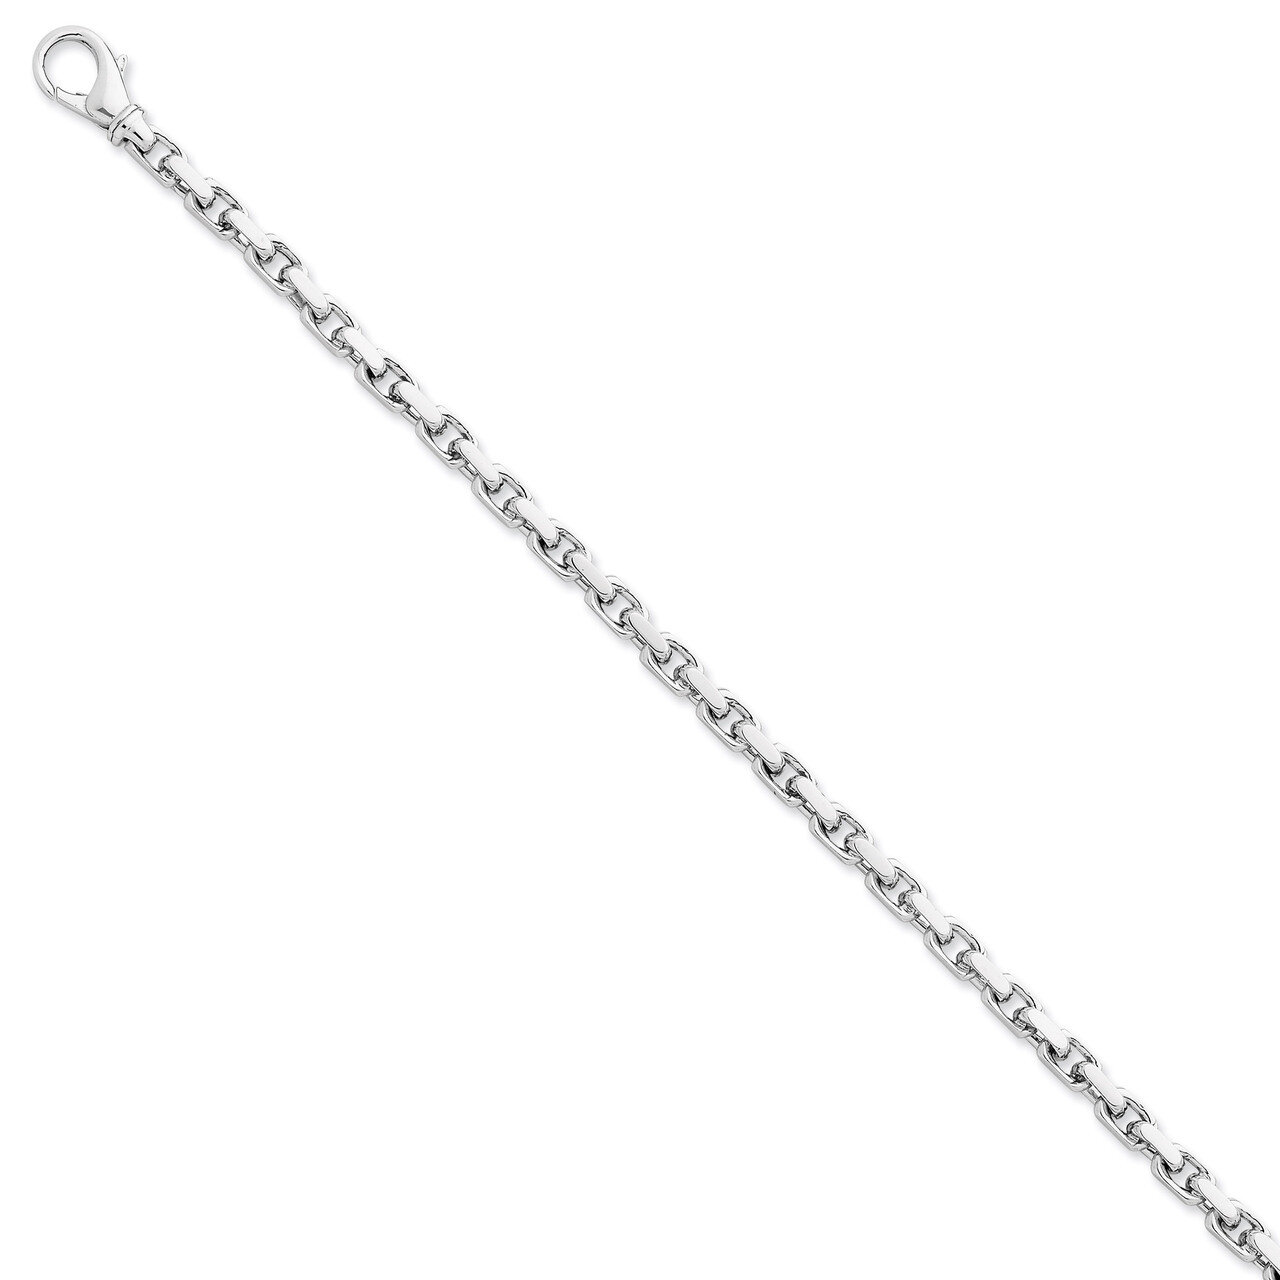 4.5mm Hand-Polished Link Chain 9 Inch 14k White Gold WLK302-9